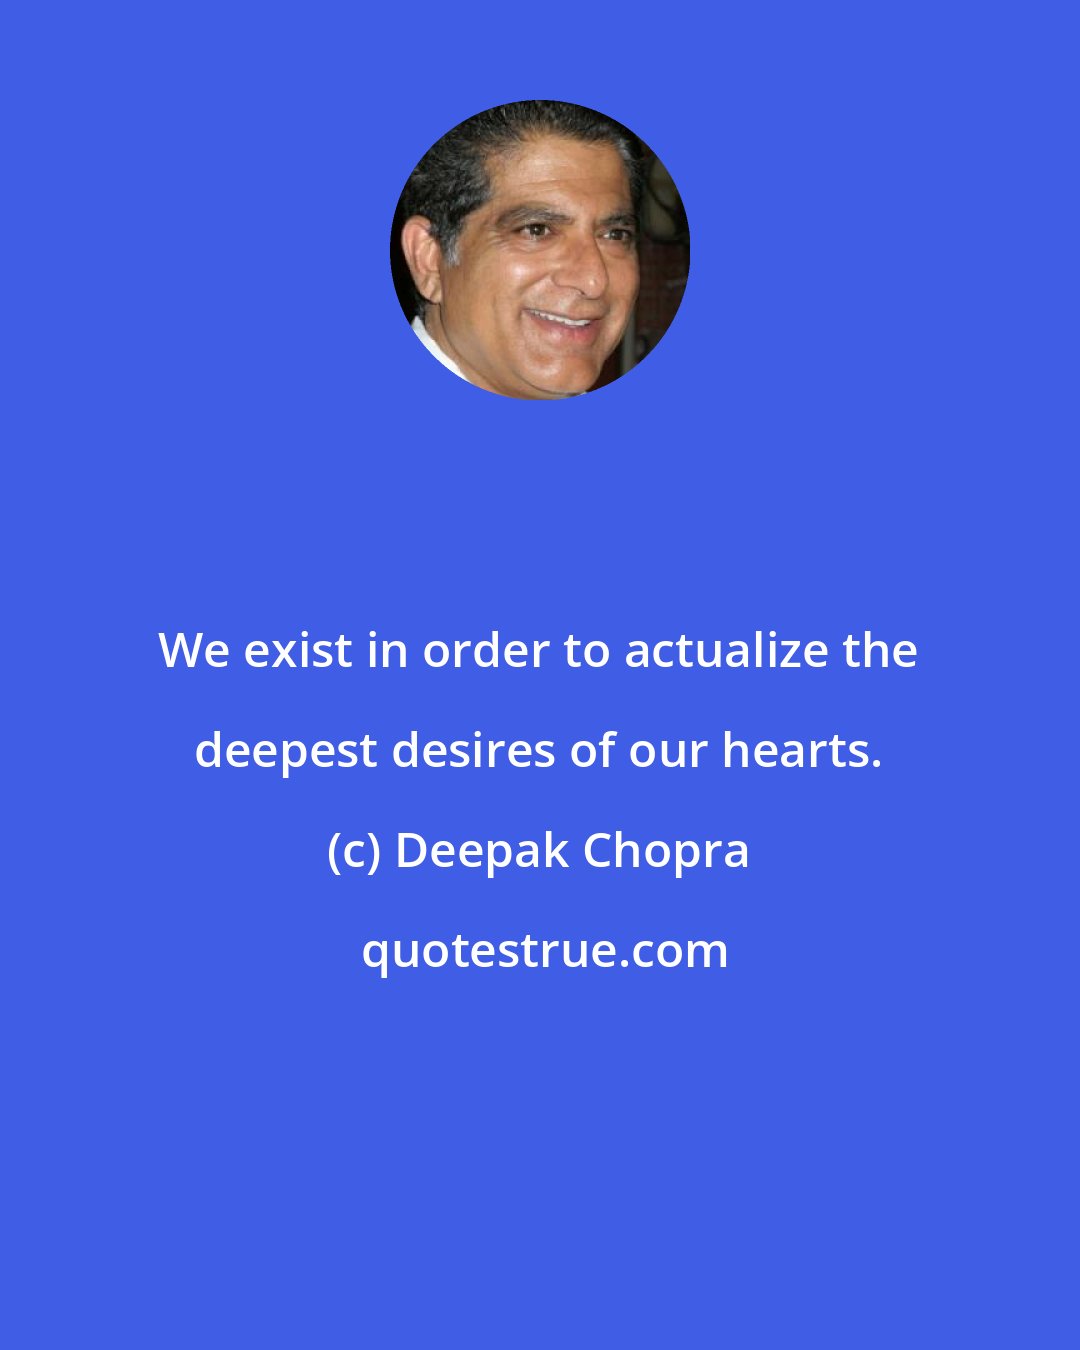 Deepak Chopra: We exist in order to actualize the deepest desires of our hearts.